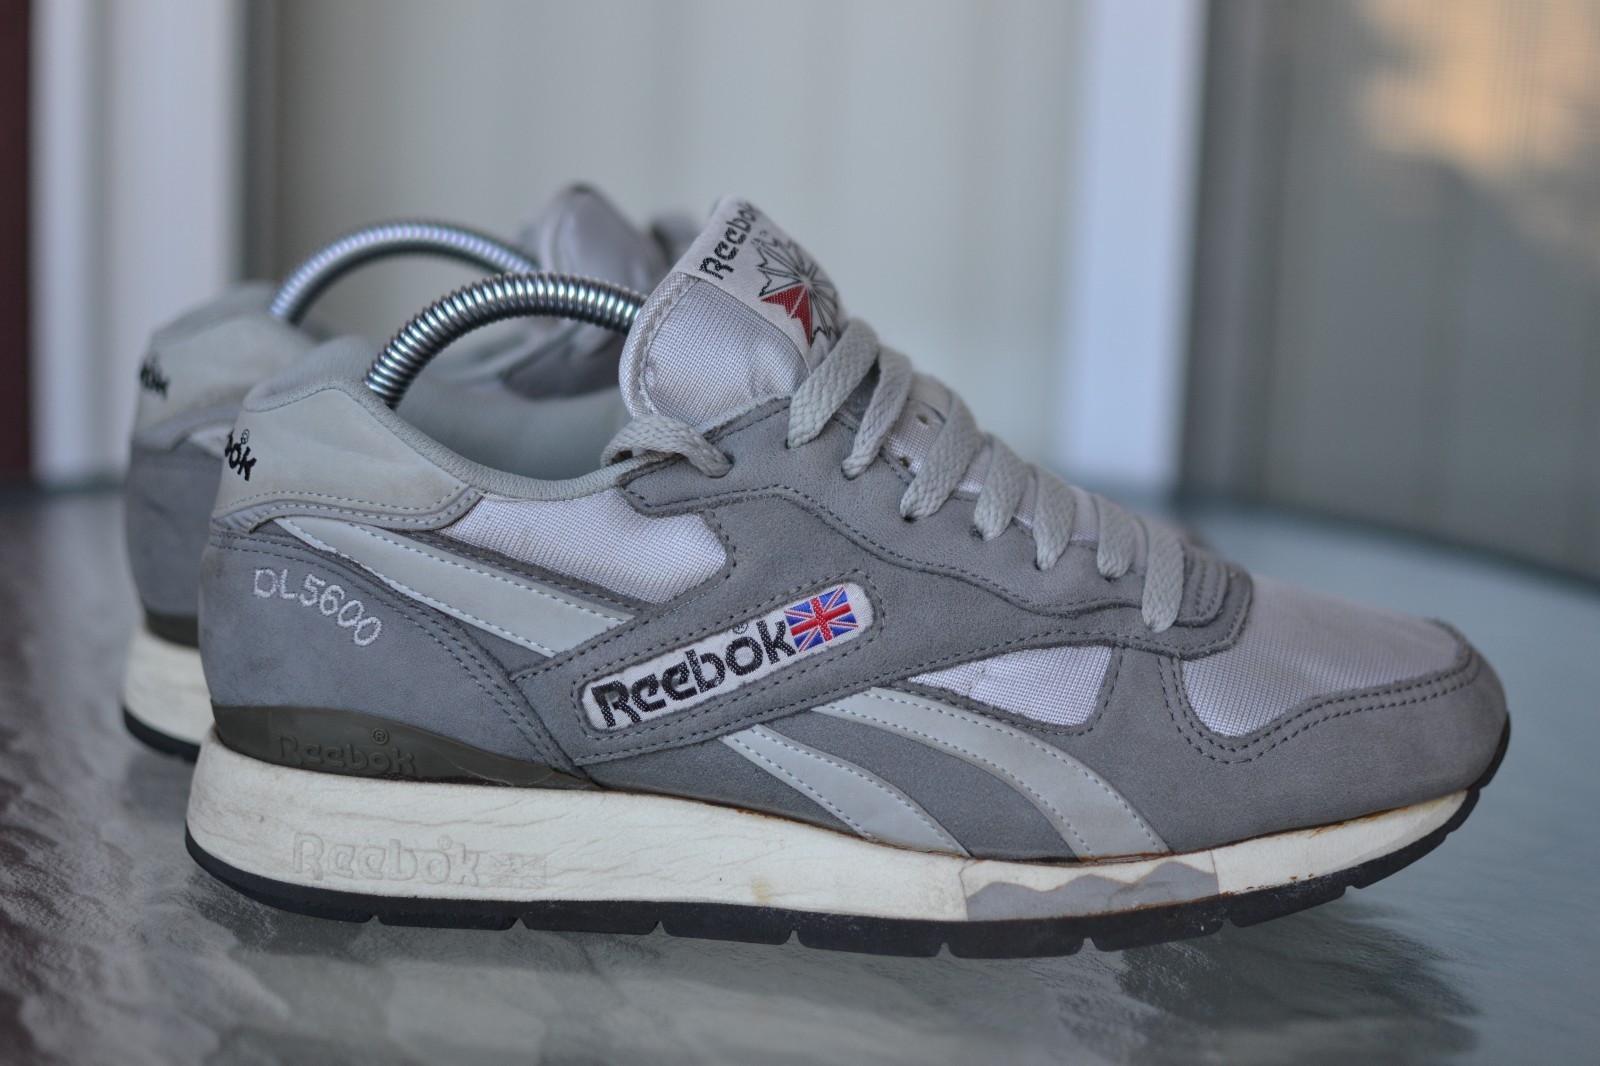 reebok shoes 5000 to 6000